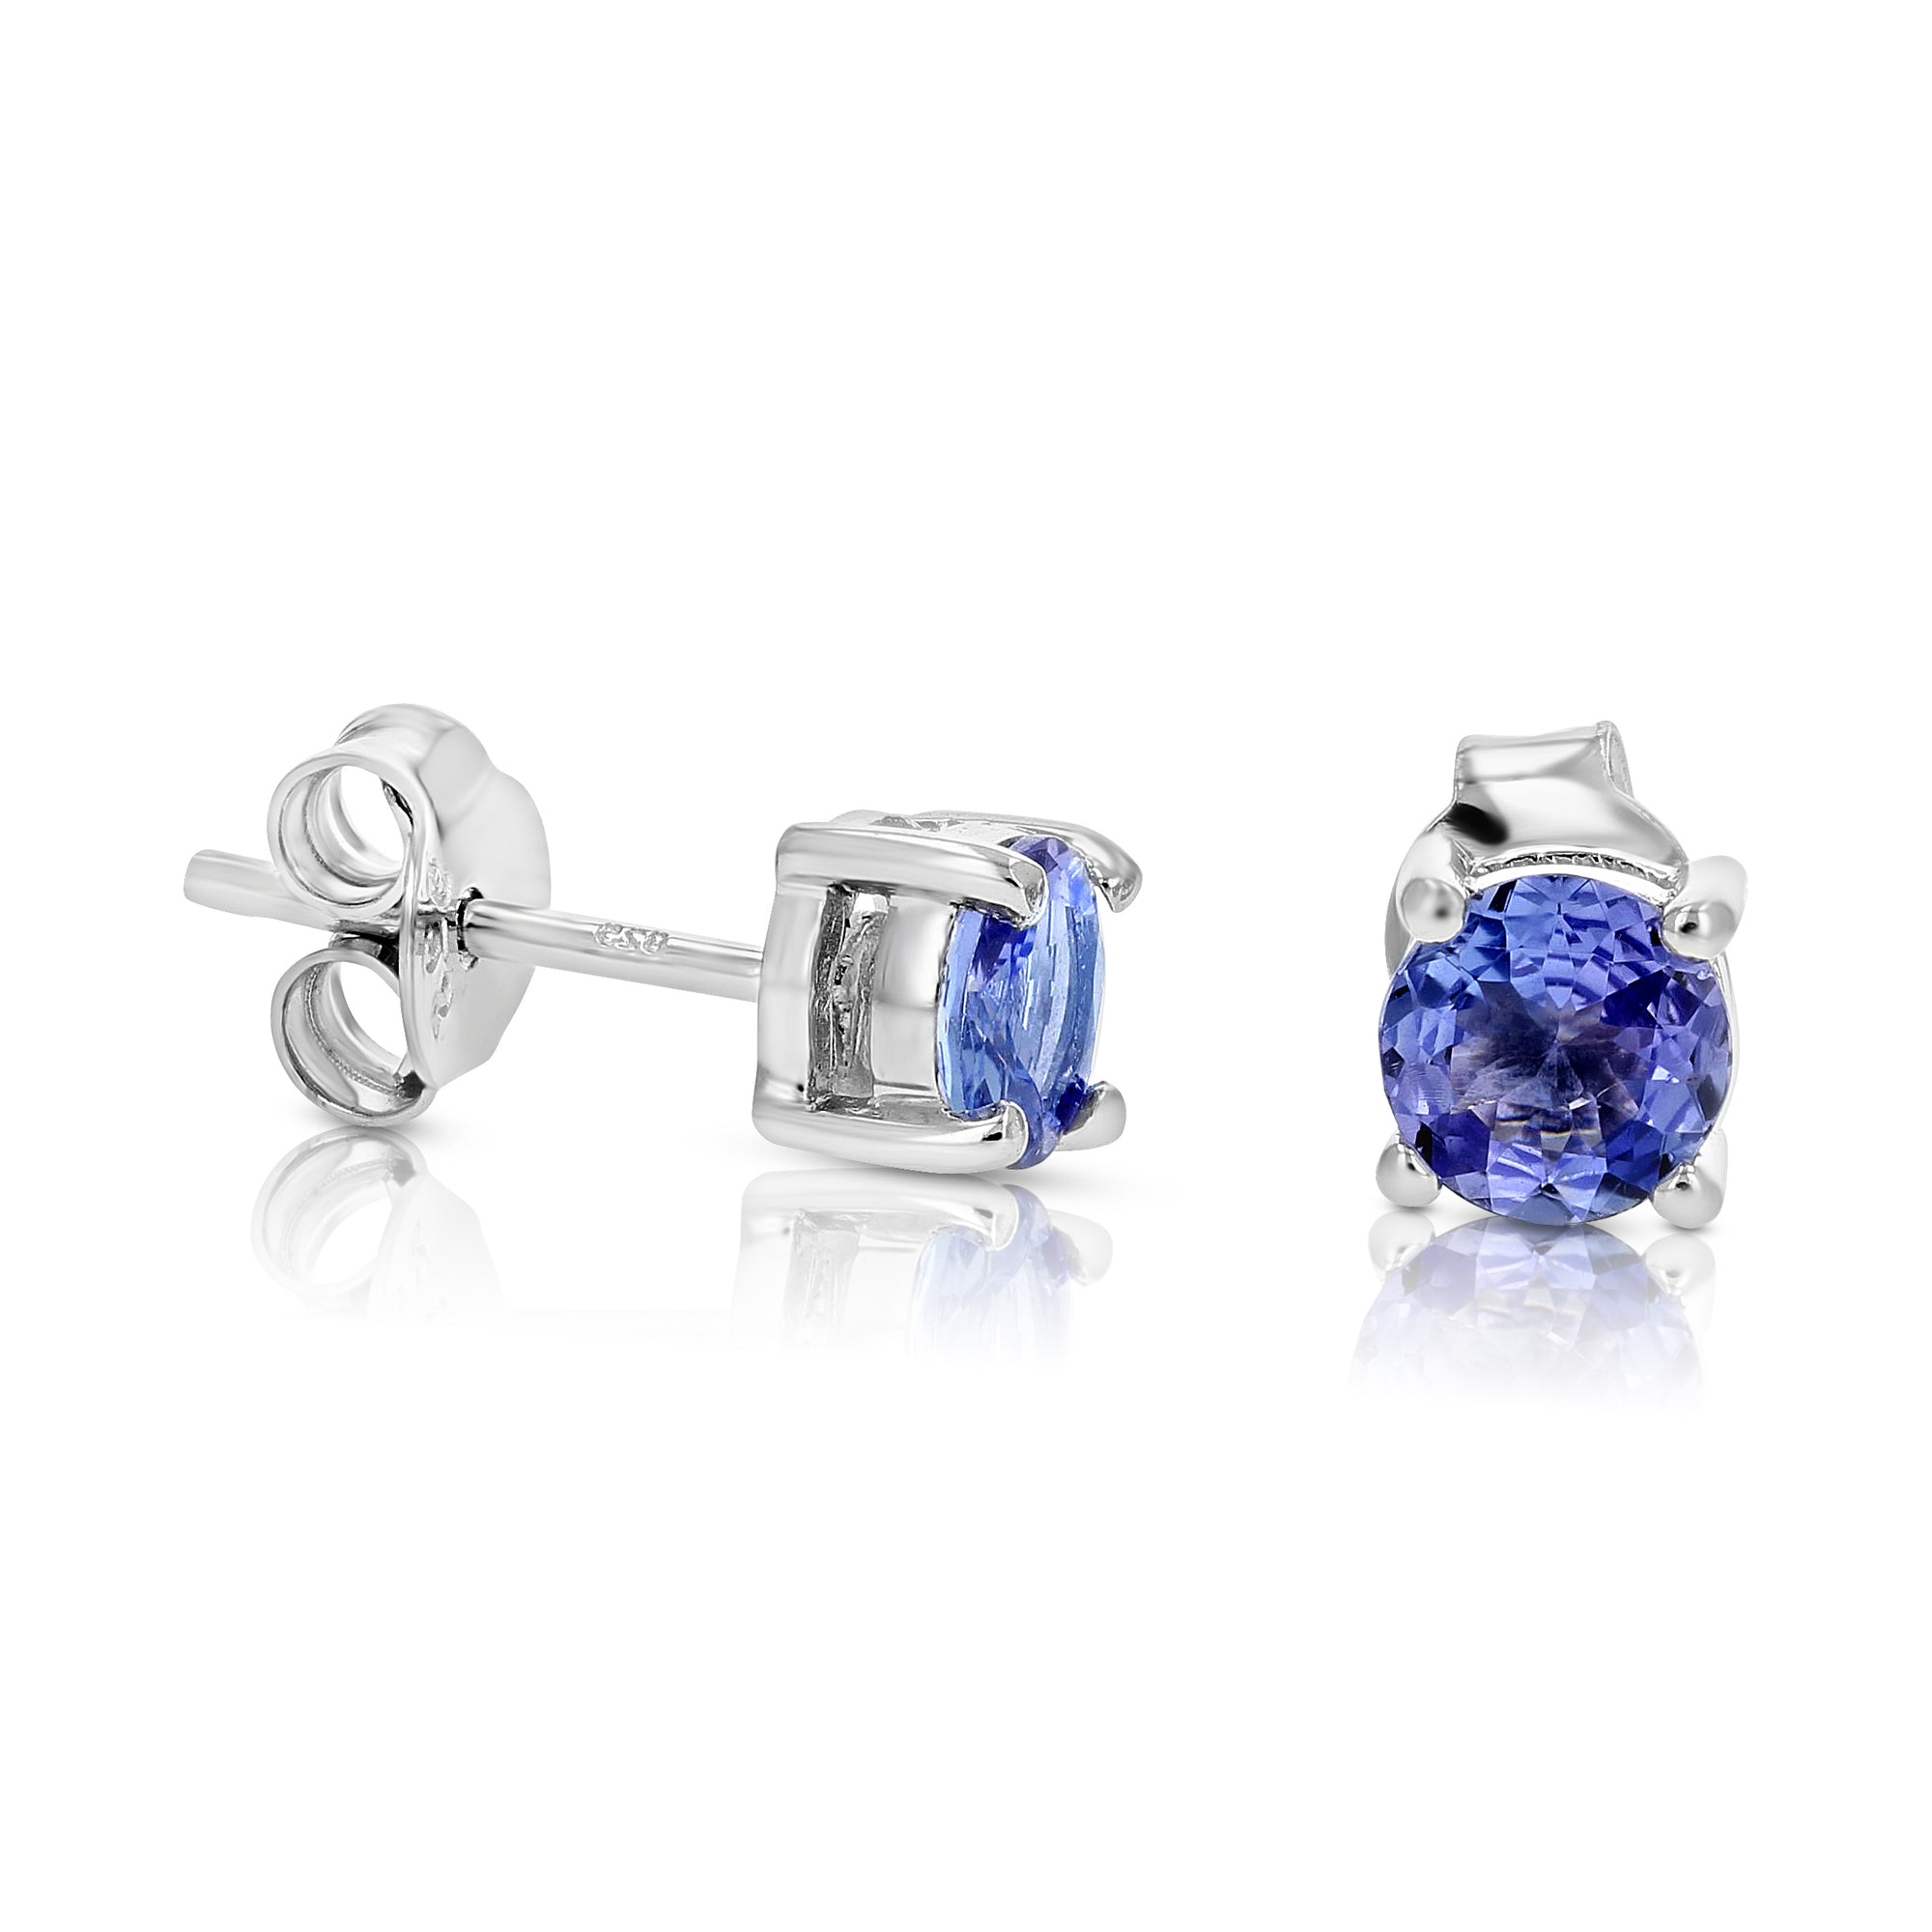 1 cttw Round Tanzanite Stud Earrings in .925 Sterling Silver with Rhodium